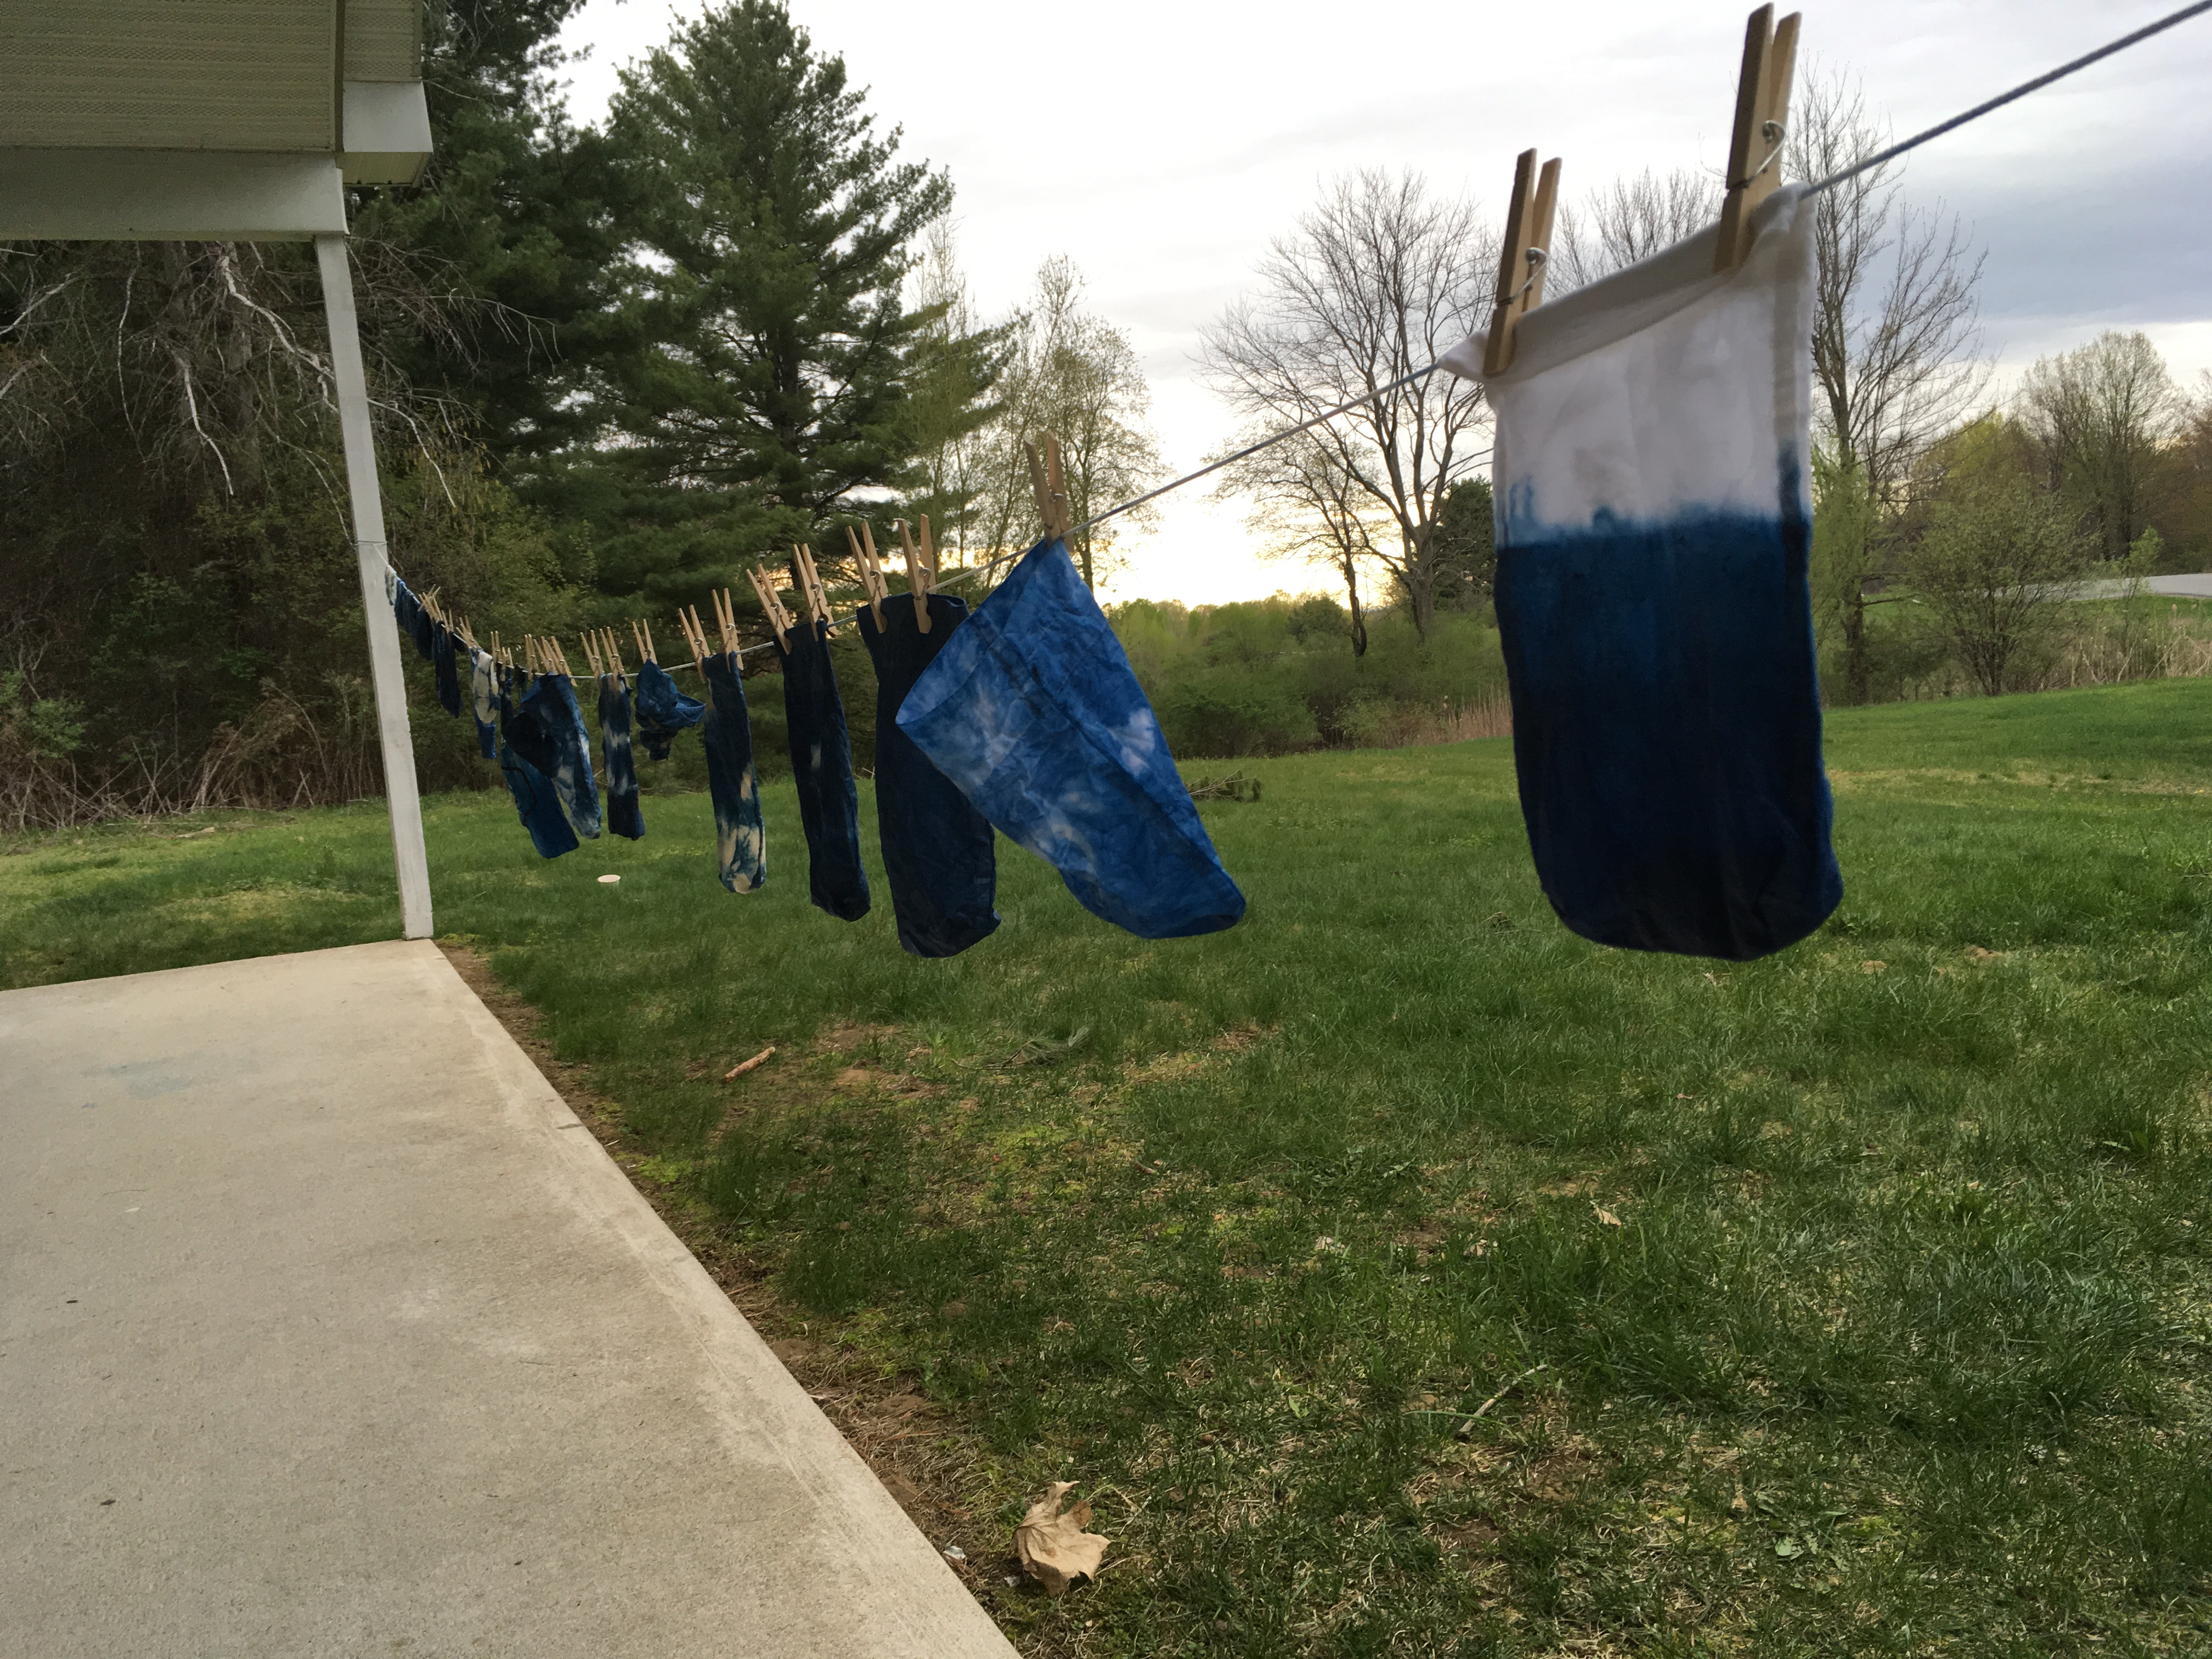 Jessica mixed up an indigo vat and led us in the basics of indigo dying muslin and cotton project bags.